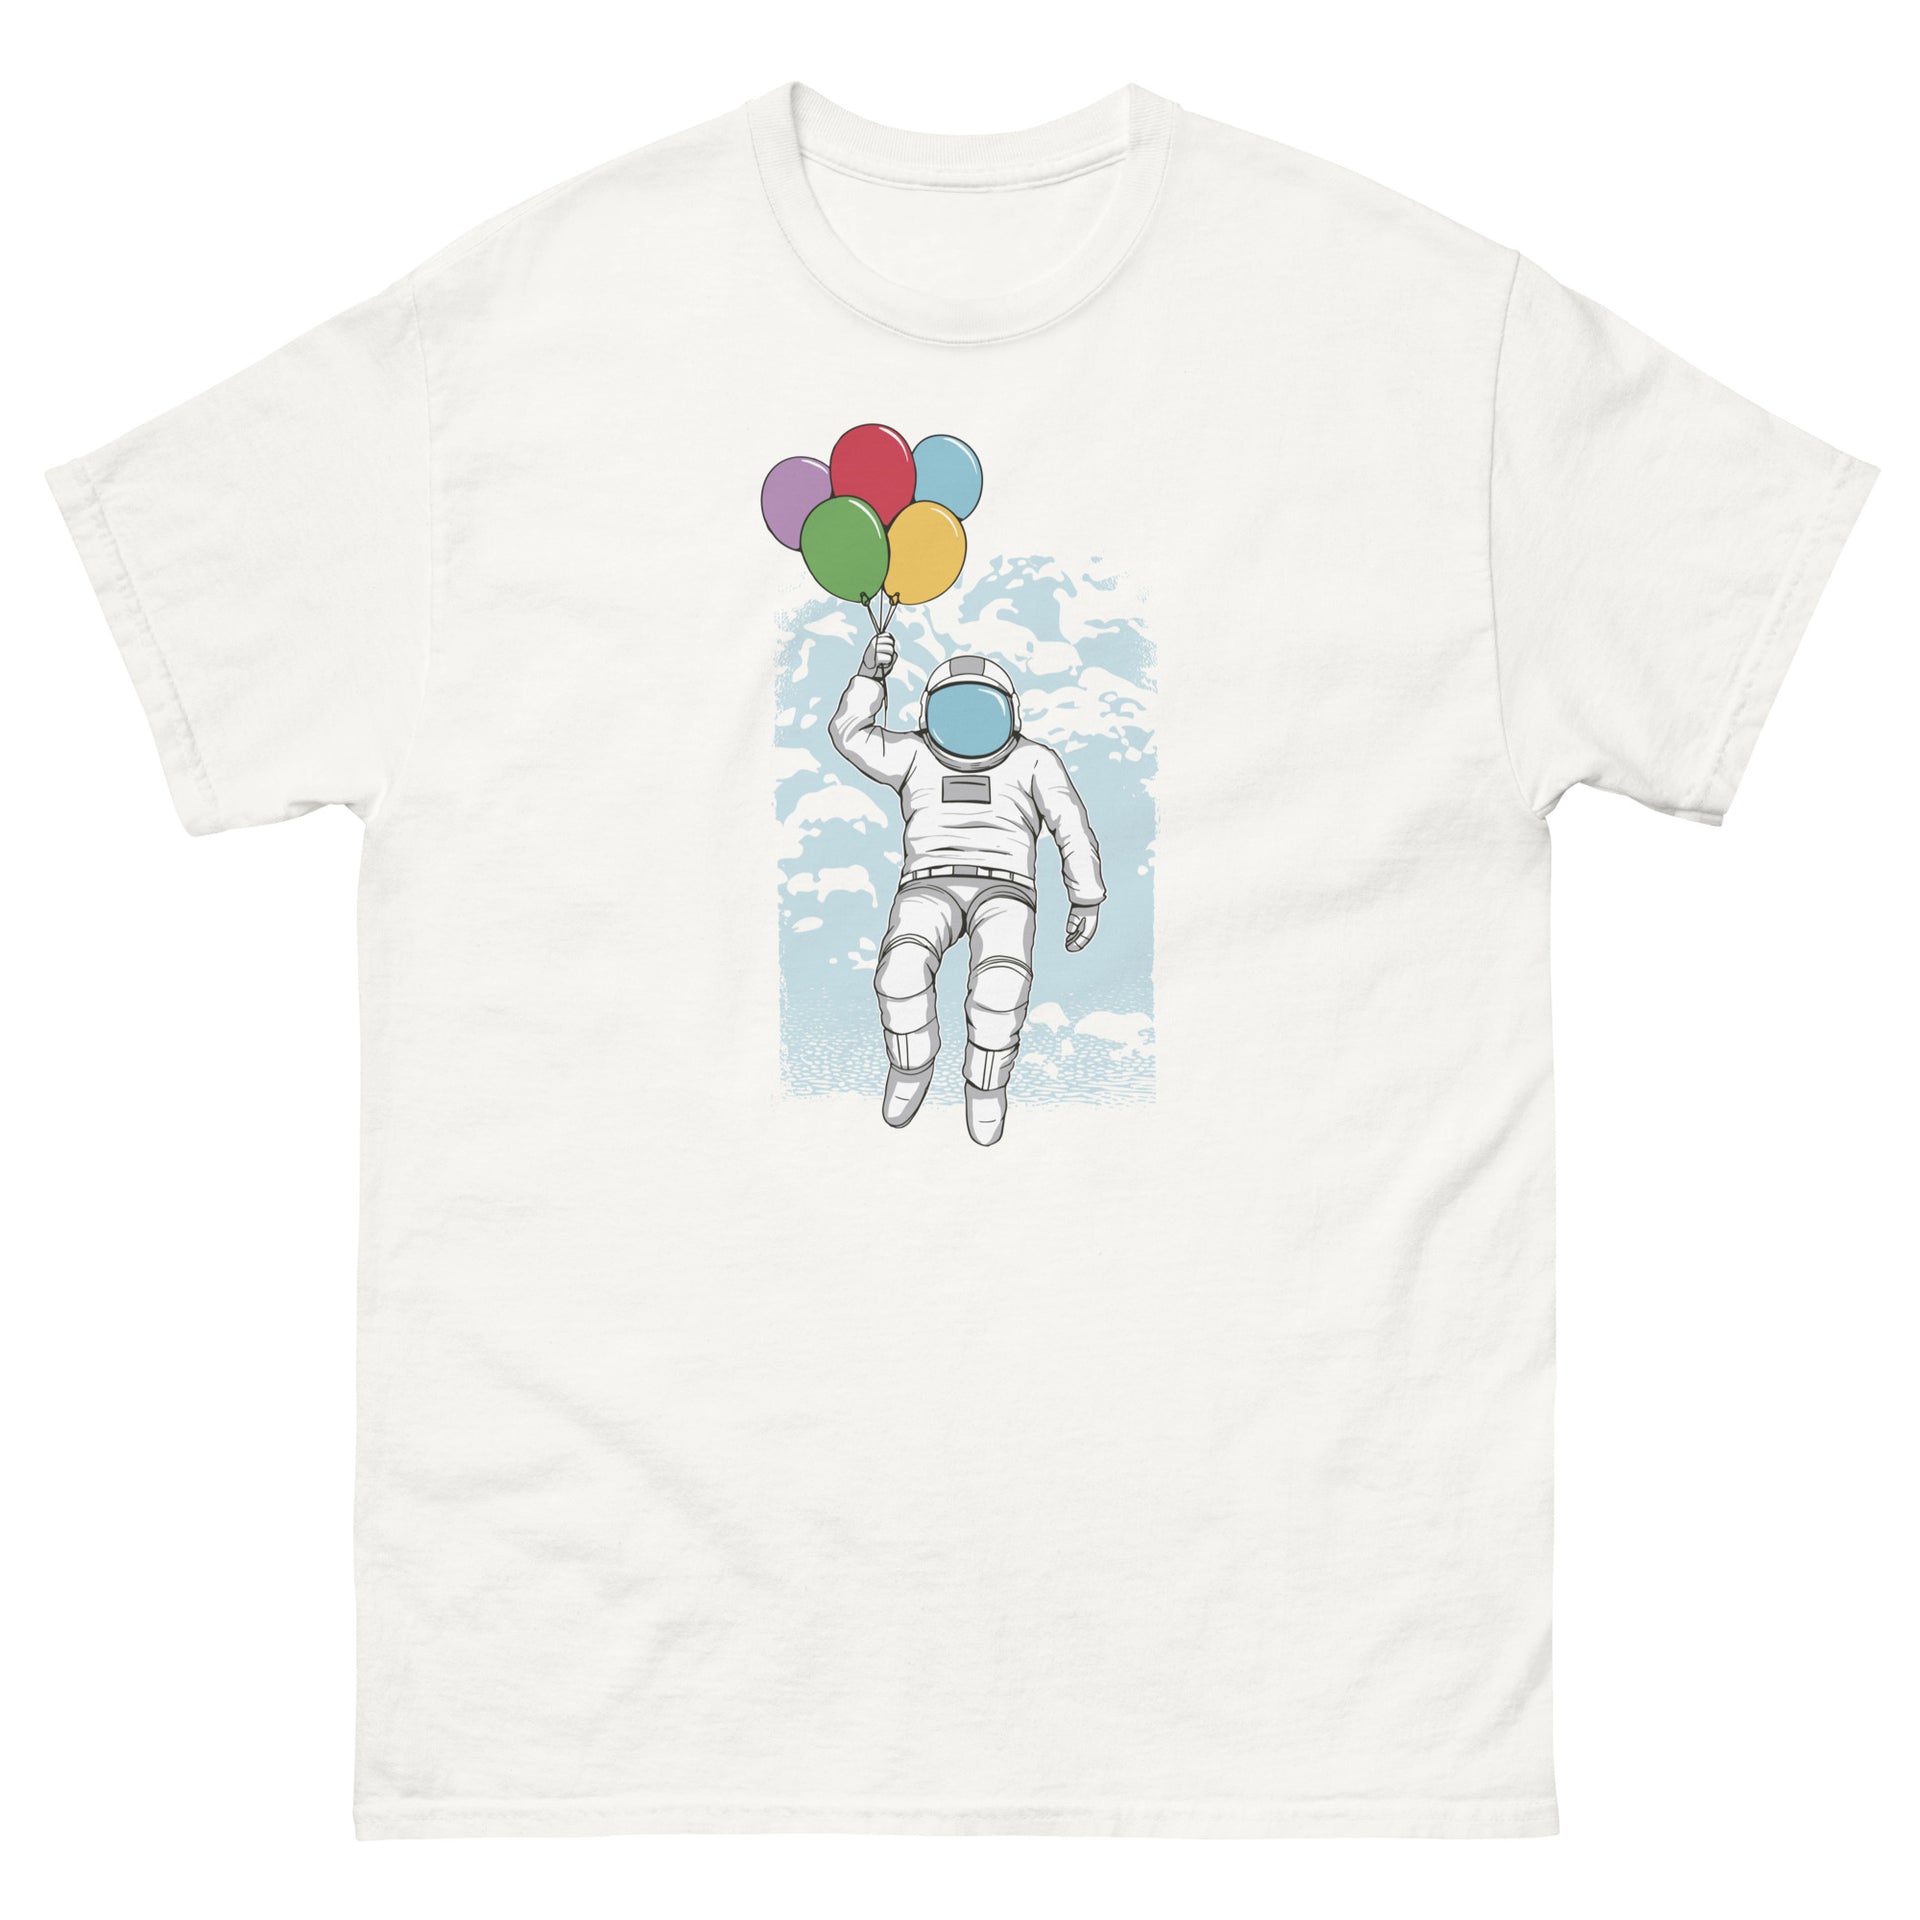 Astronaut Floating With Balloons Men's T-Shirt